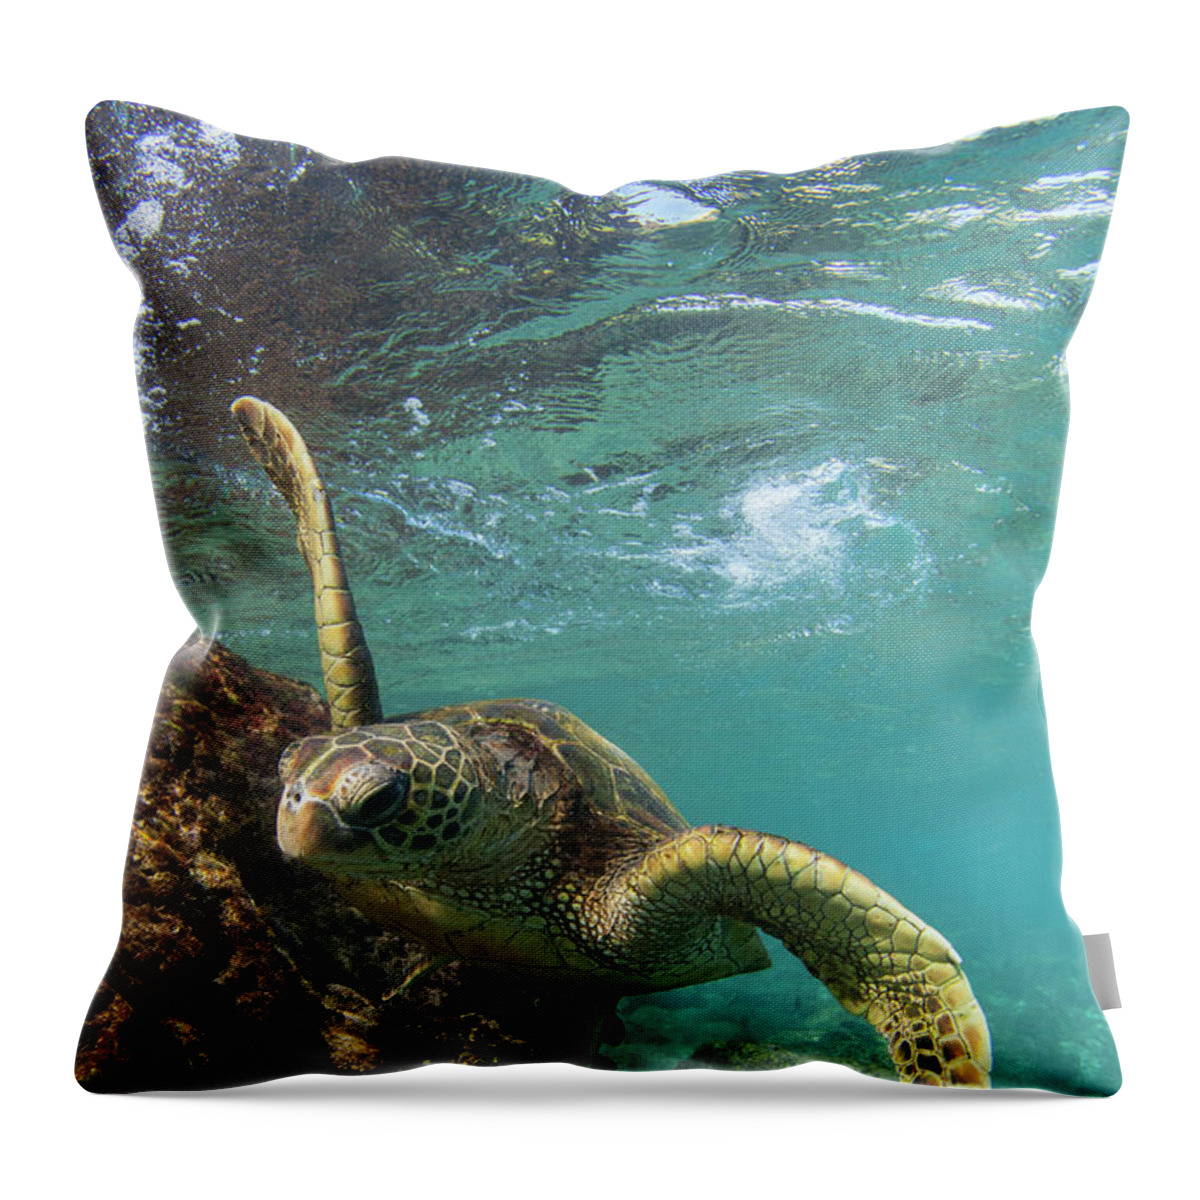 Maui Hawaii Green Sea Turtle Black Rock Ocean Throw Pillow featuring the photograph Flying #1 by James Roemmling